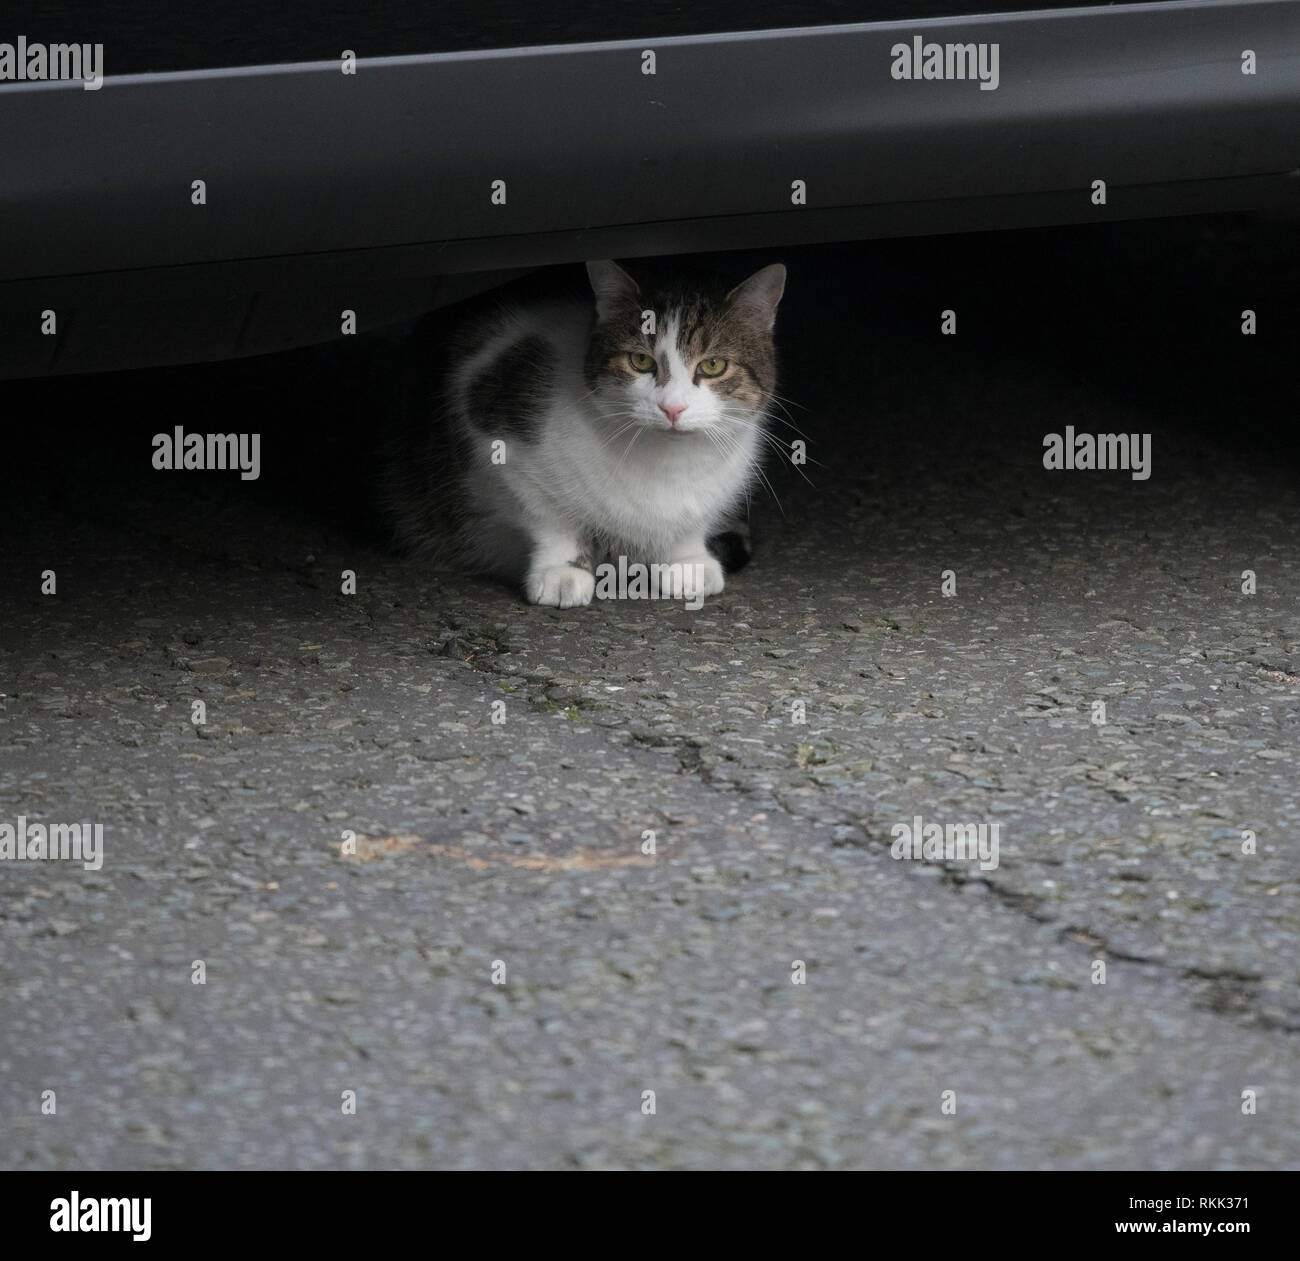 Downing Street, London, UK. 12 February 2019. Government Ministers arrive in Downing Street for weekly cabinet meeting. Larry the cat hides under a ministerial car. Credit: Malcolm Park/Alamy Live News. Stock Photo